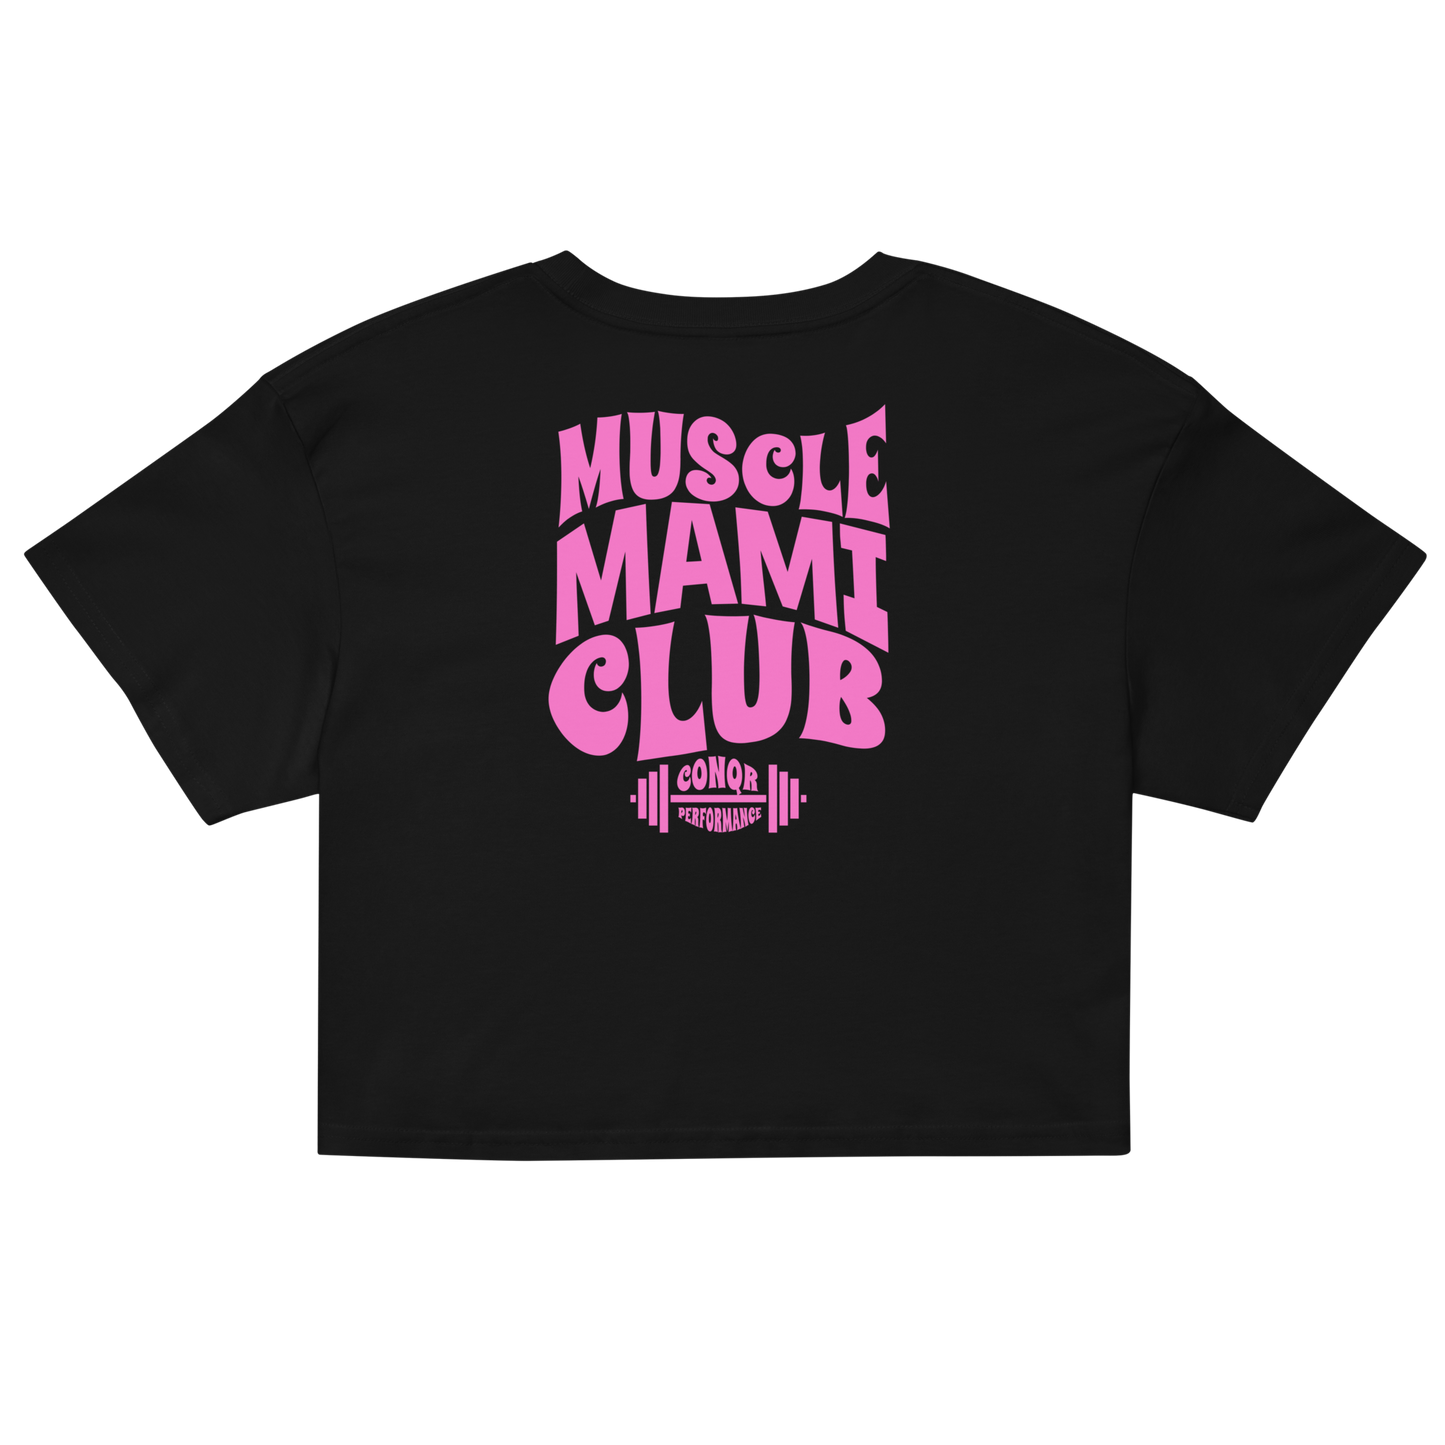 Muscle Mami crop top (pink)